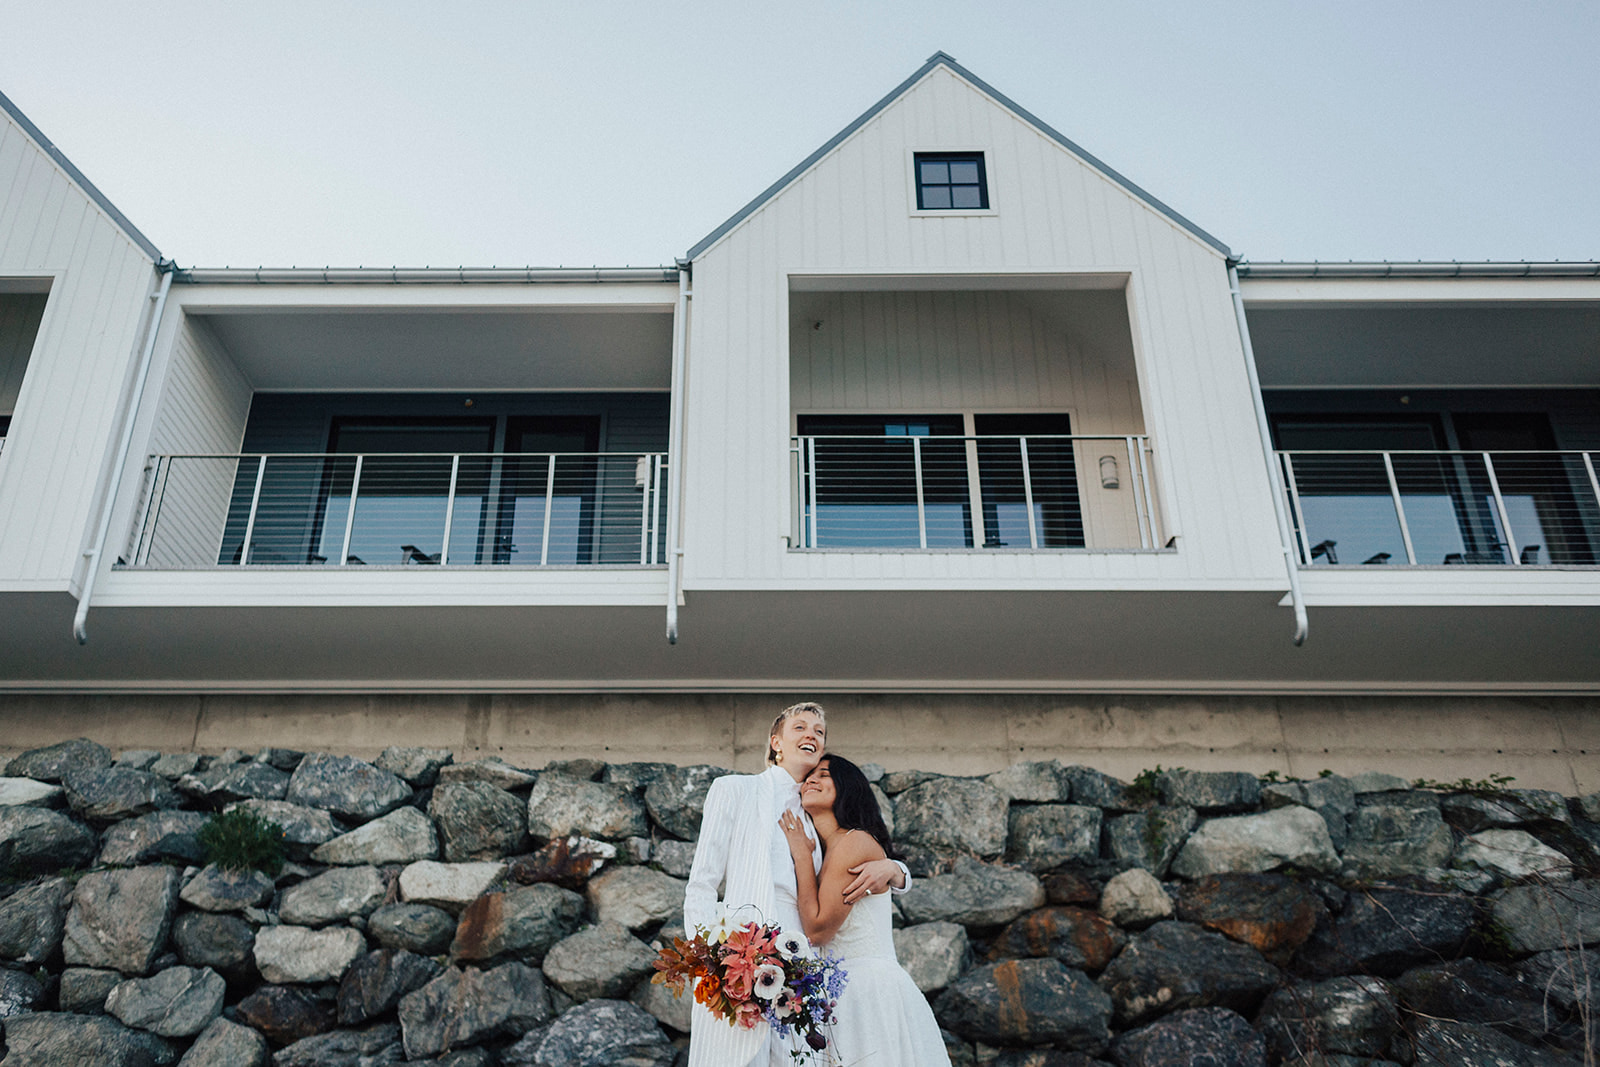 Intimate Elopement at Outlook Inn on Orcas Island. Eastsound Wedding in the San Juan Islands. Vintage styling